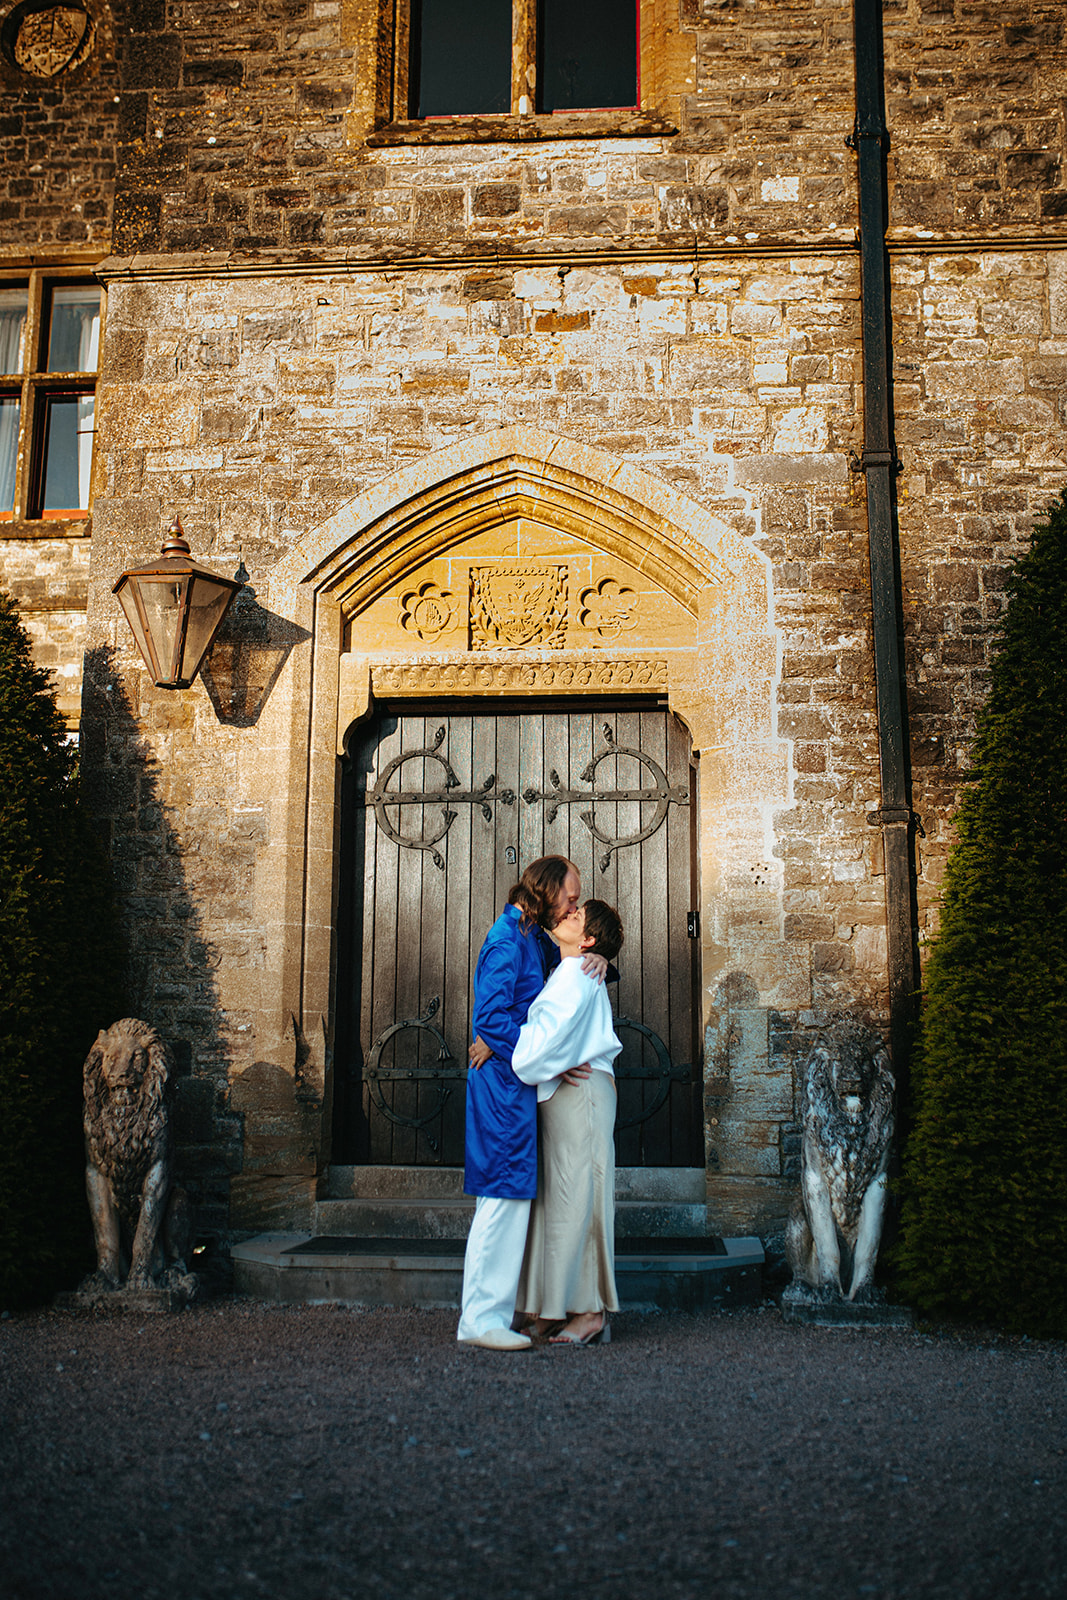 Gentle embrace: Couple in love sharing a passionate kiss in front of the enchanting Huntsham Court castle, England